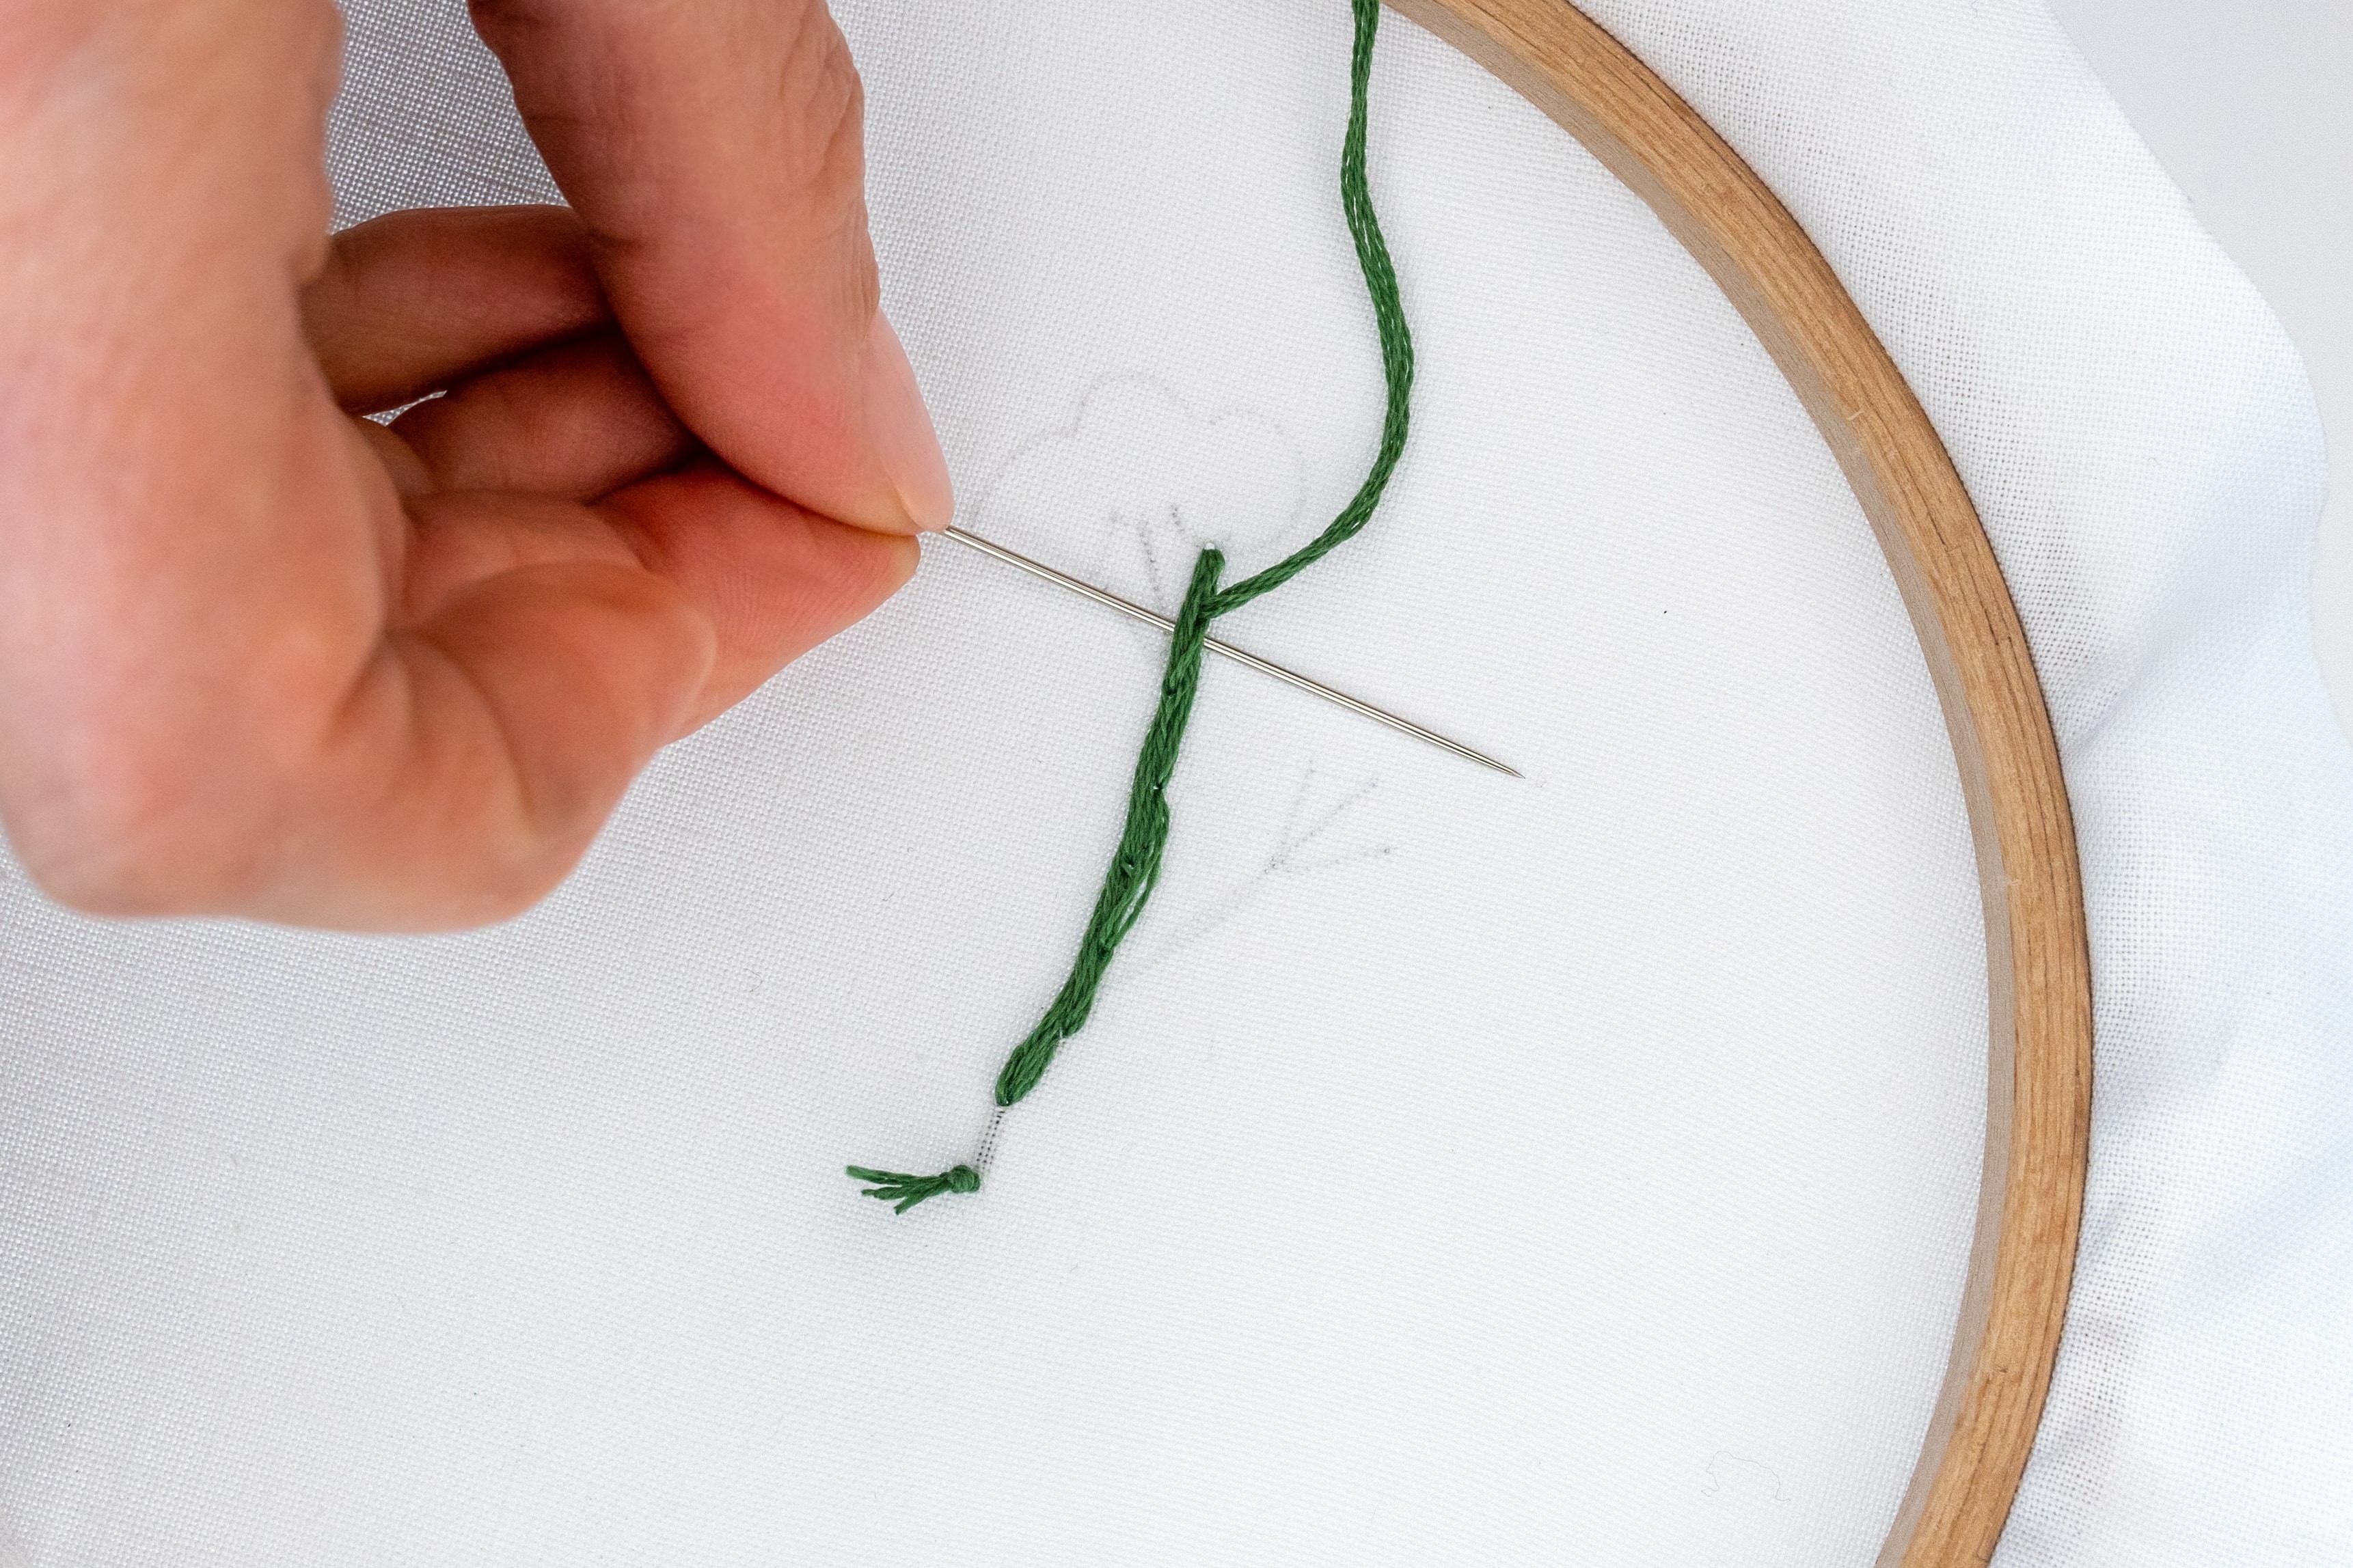 A hand pushes a needle through the back of stitching.